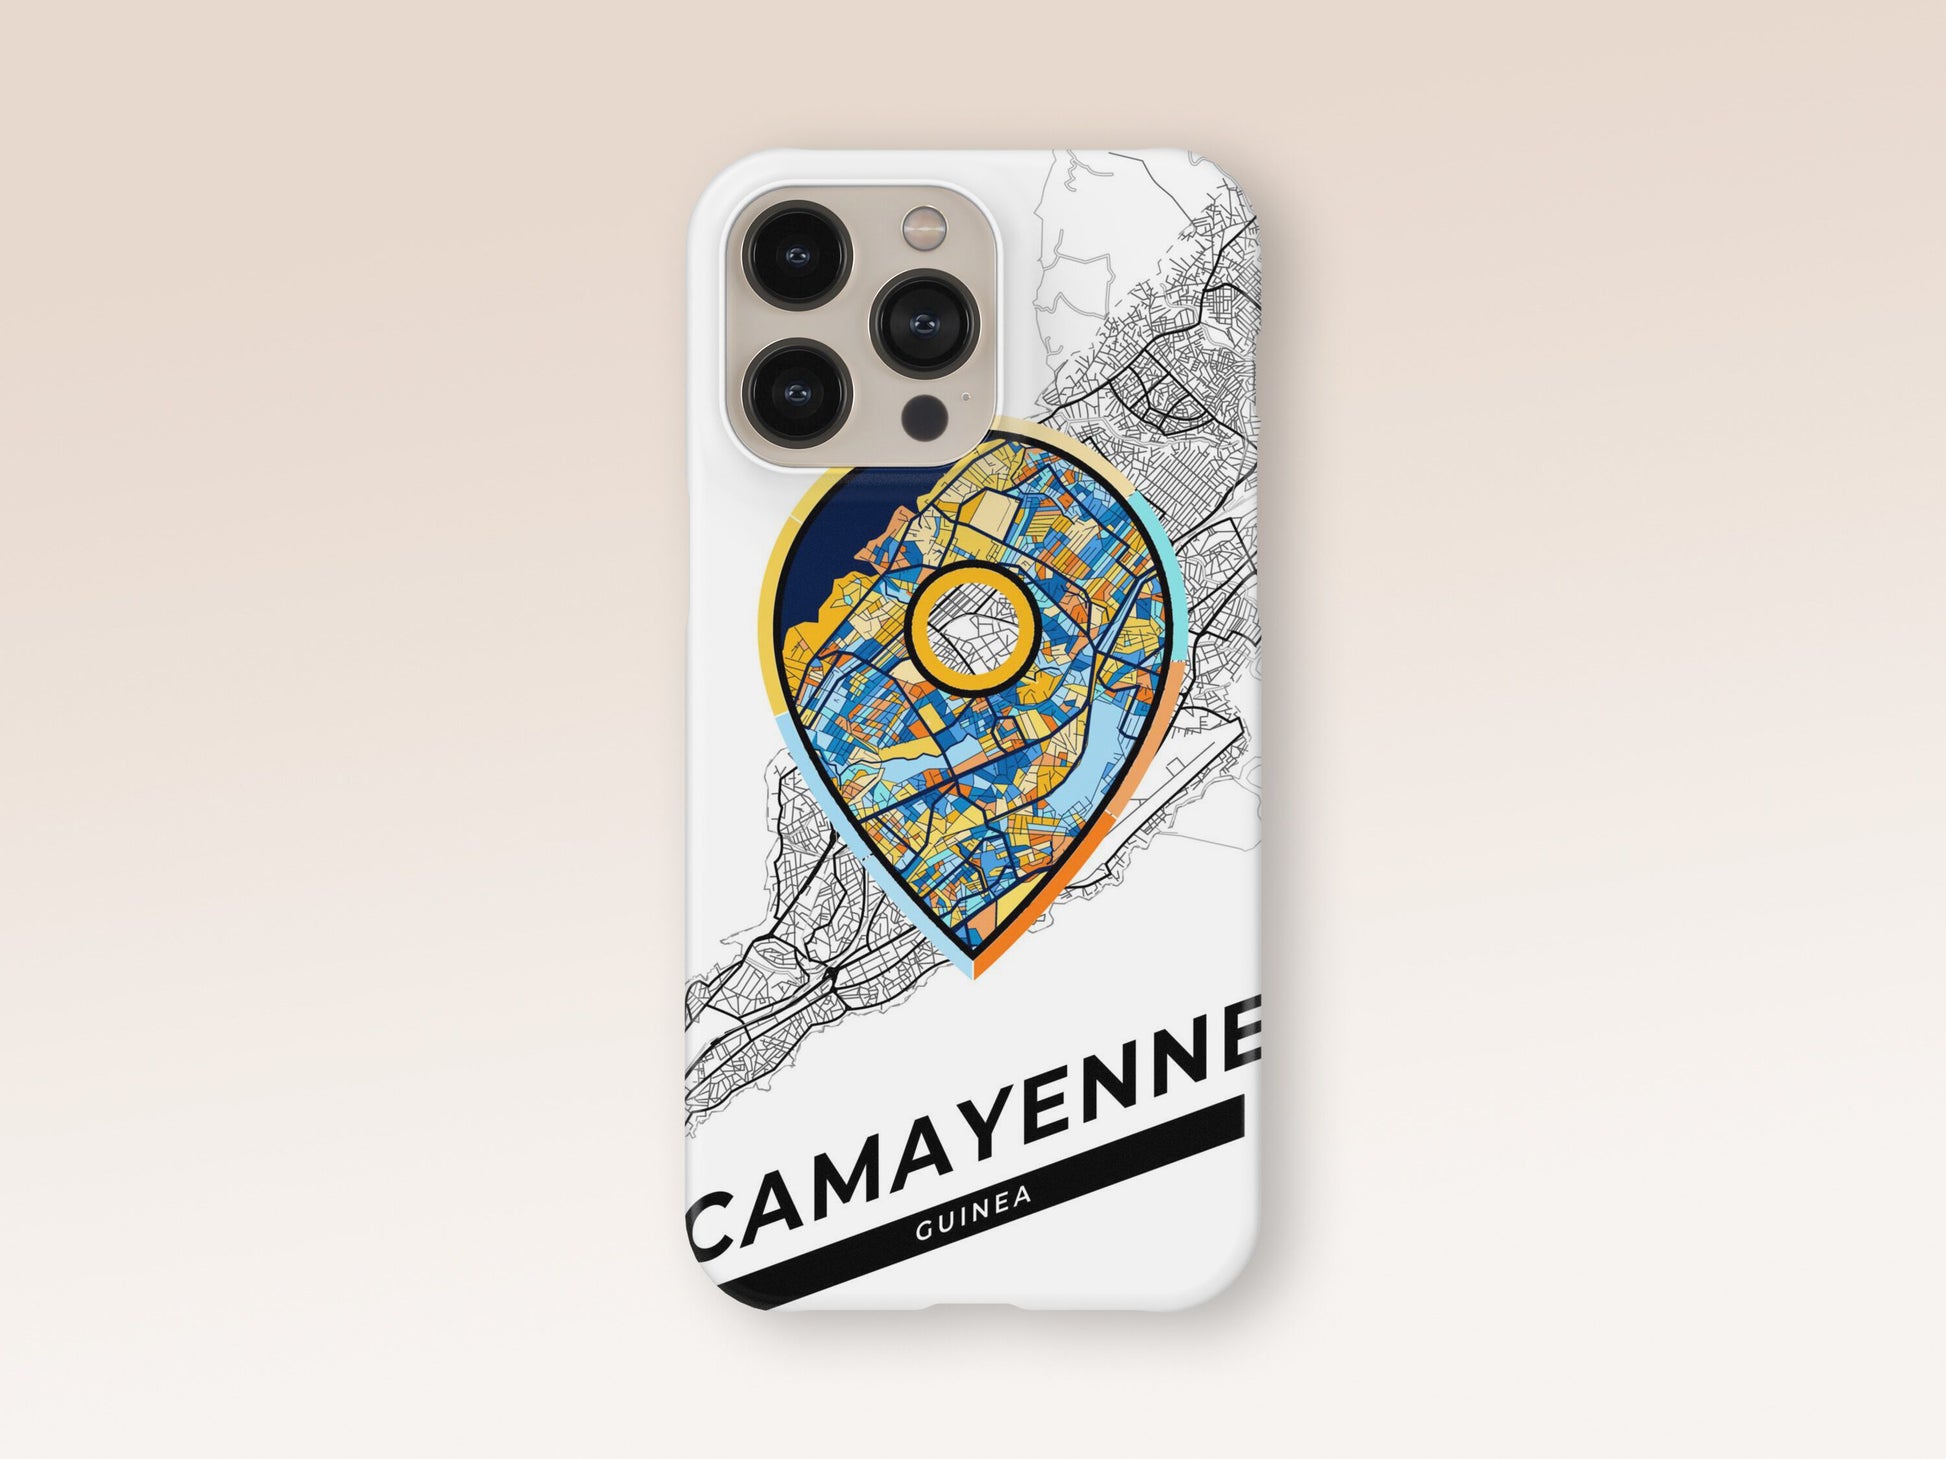 Camayenne Guinea slim phone case with colorful icon. Birthday, wedding or housewarming gift. Couple match cases. 1